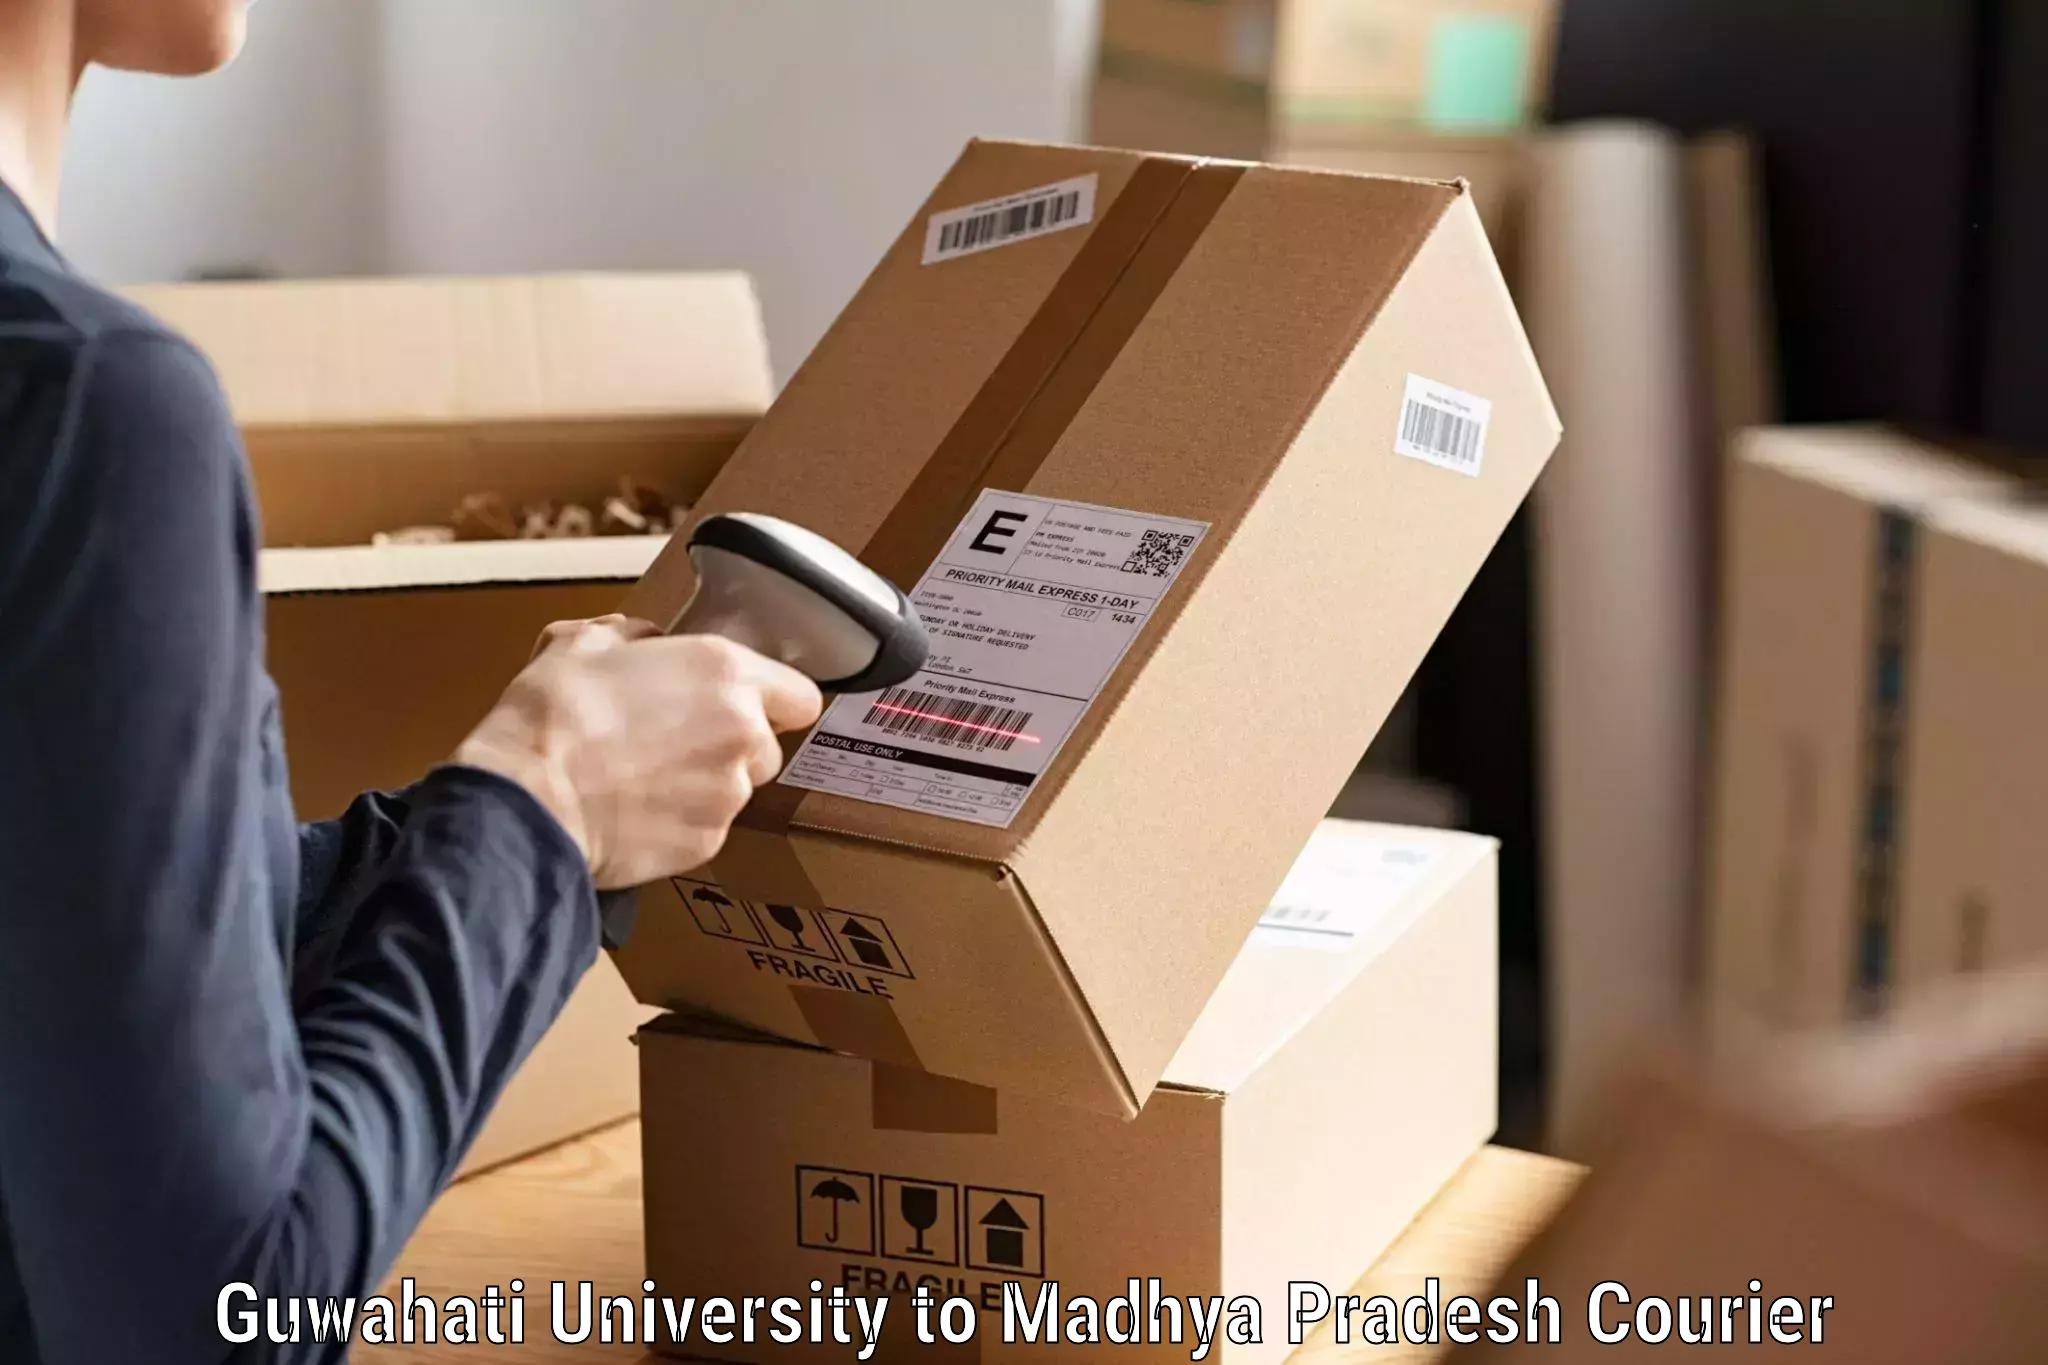 Multi-national courier services Guwahati University to Sheopur